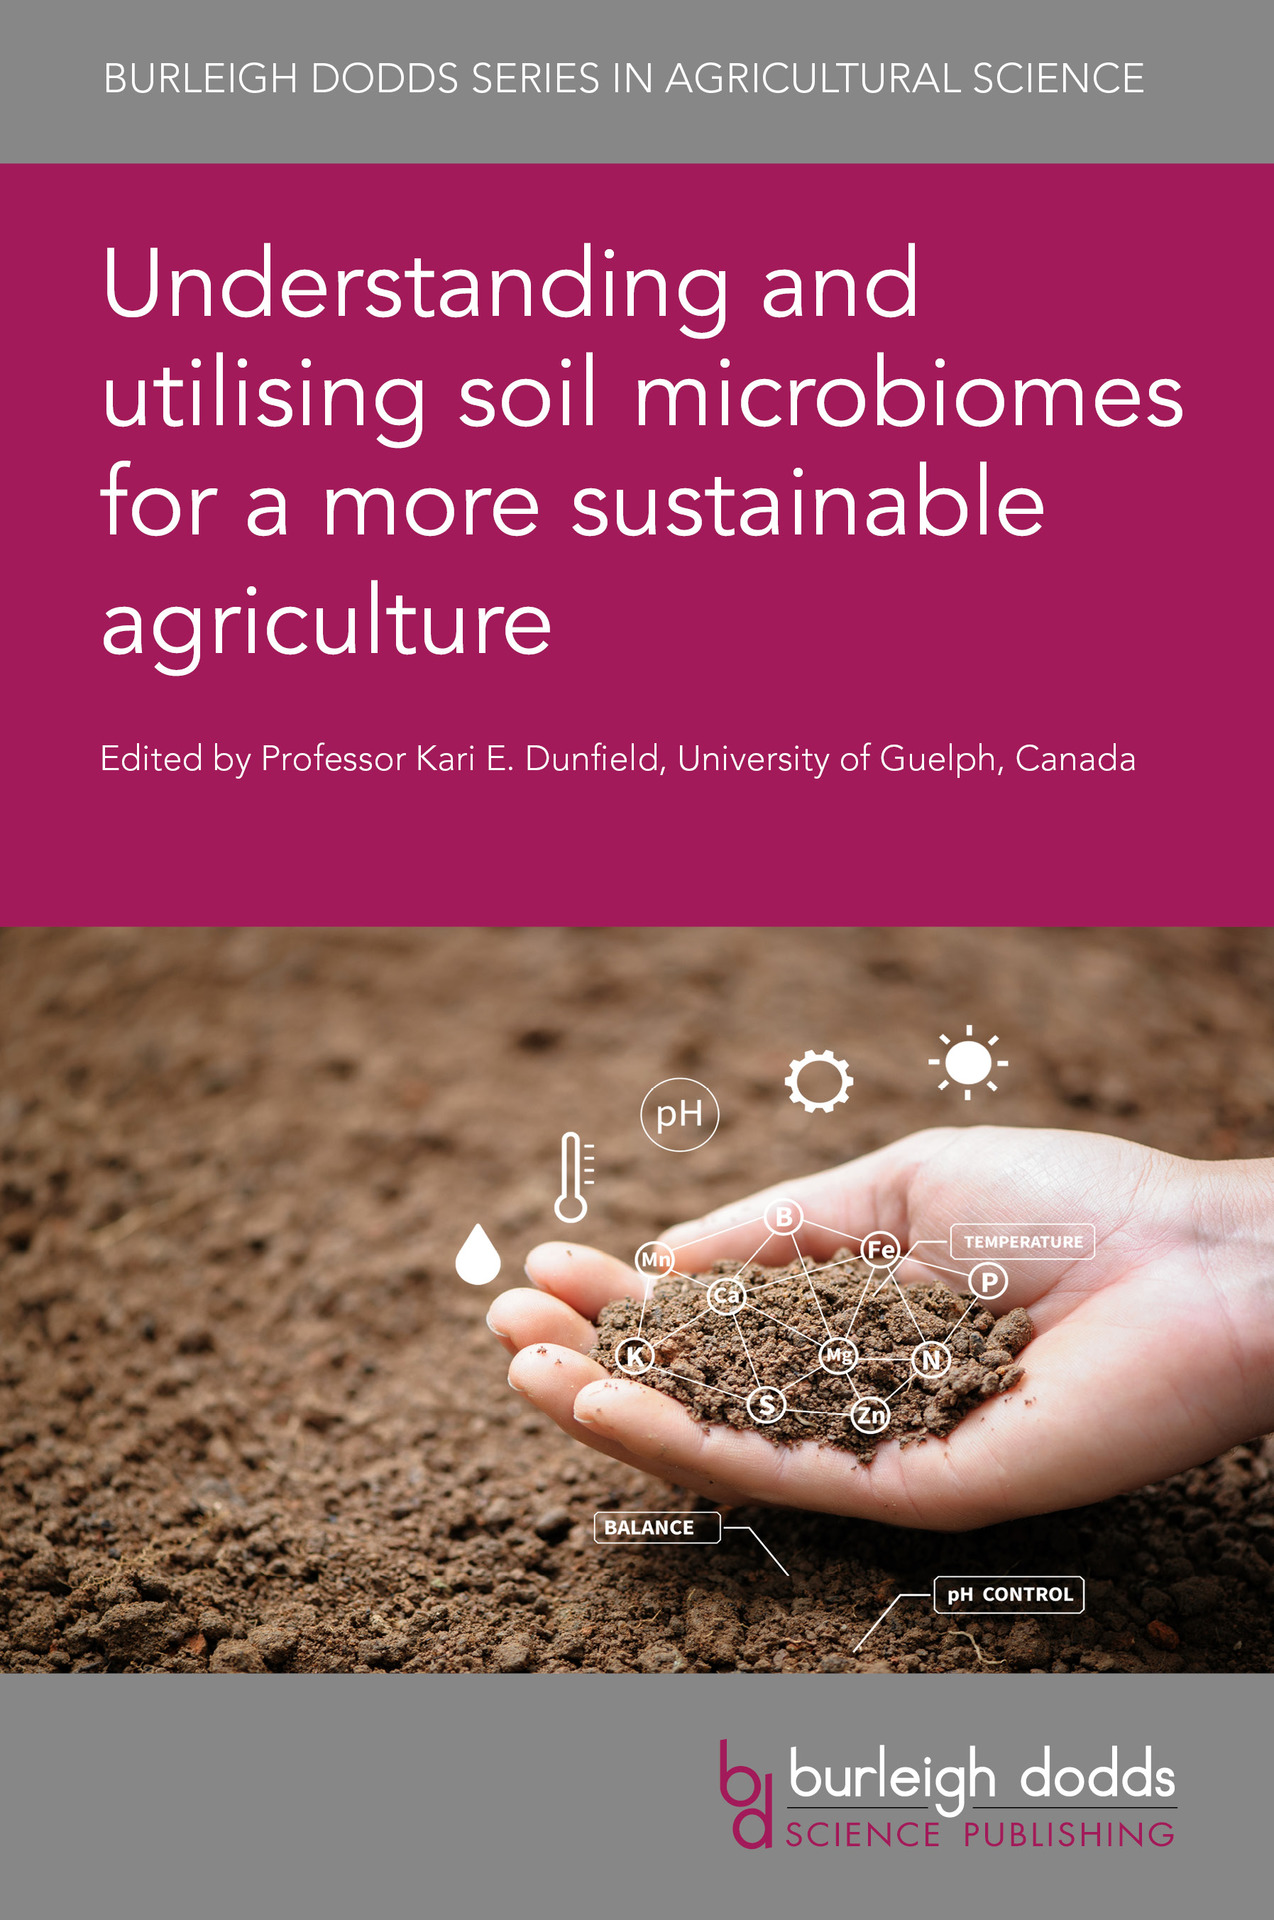 Understanding and utilising soil microbiomes for a more sustainable agriculture